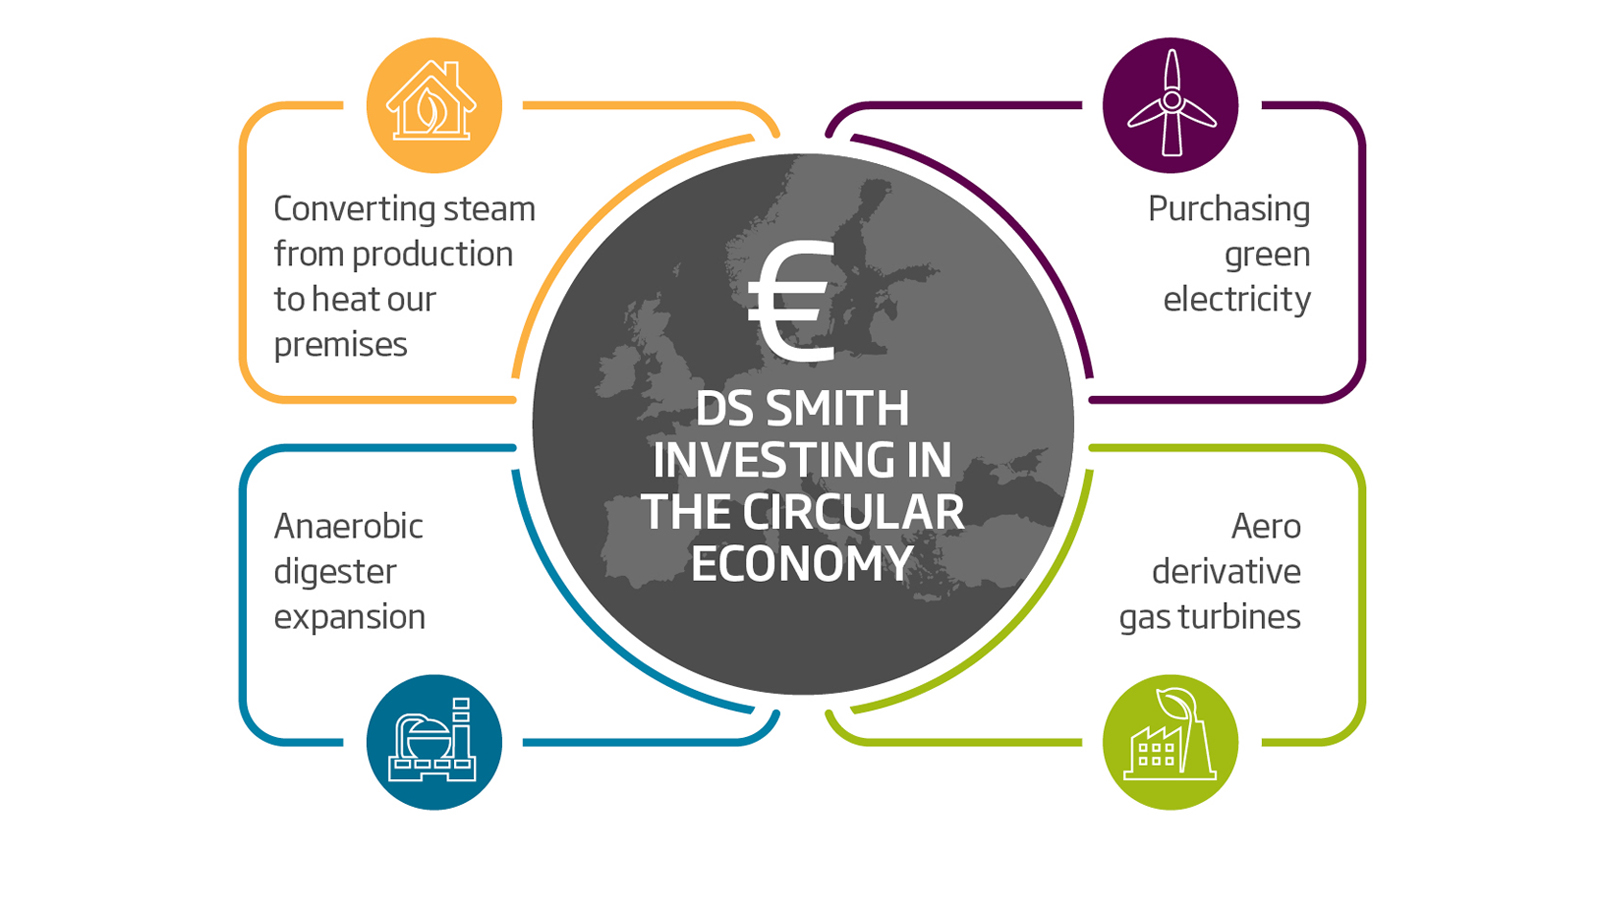 Across Europe, we're investing strategically in green electricity, renewables and energy efficiency